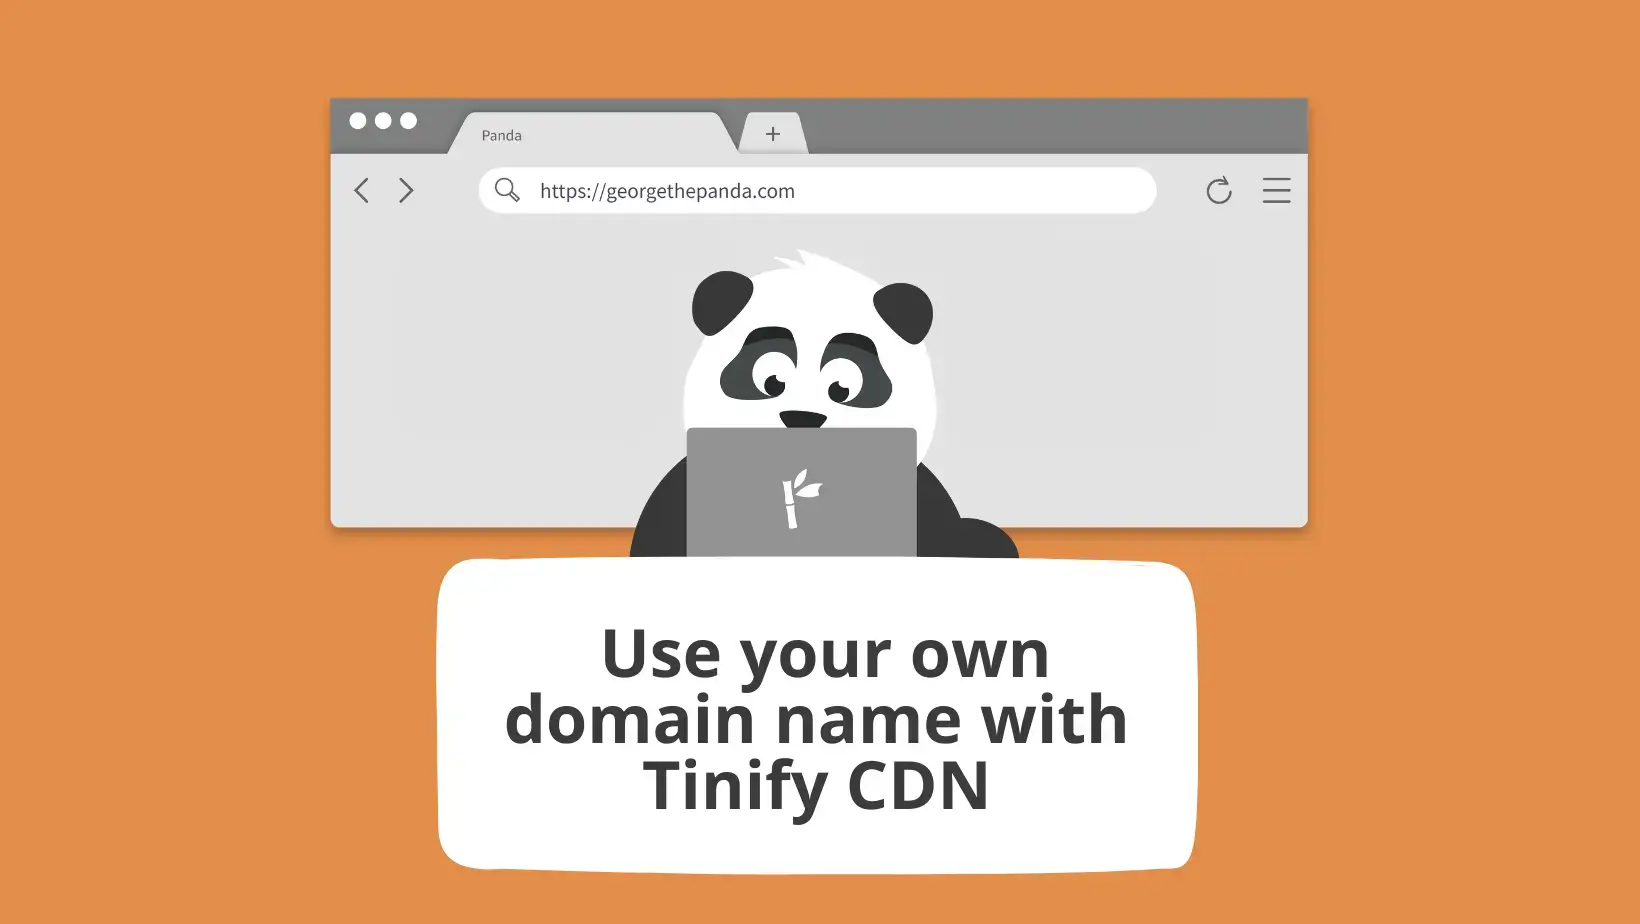 [New feature] Custom Domain: Use your own domain name with Tinify CDN